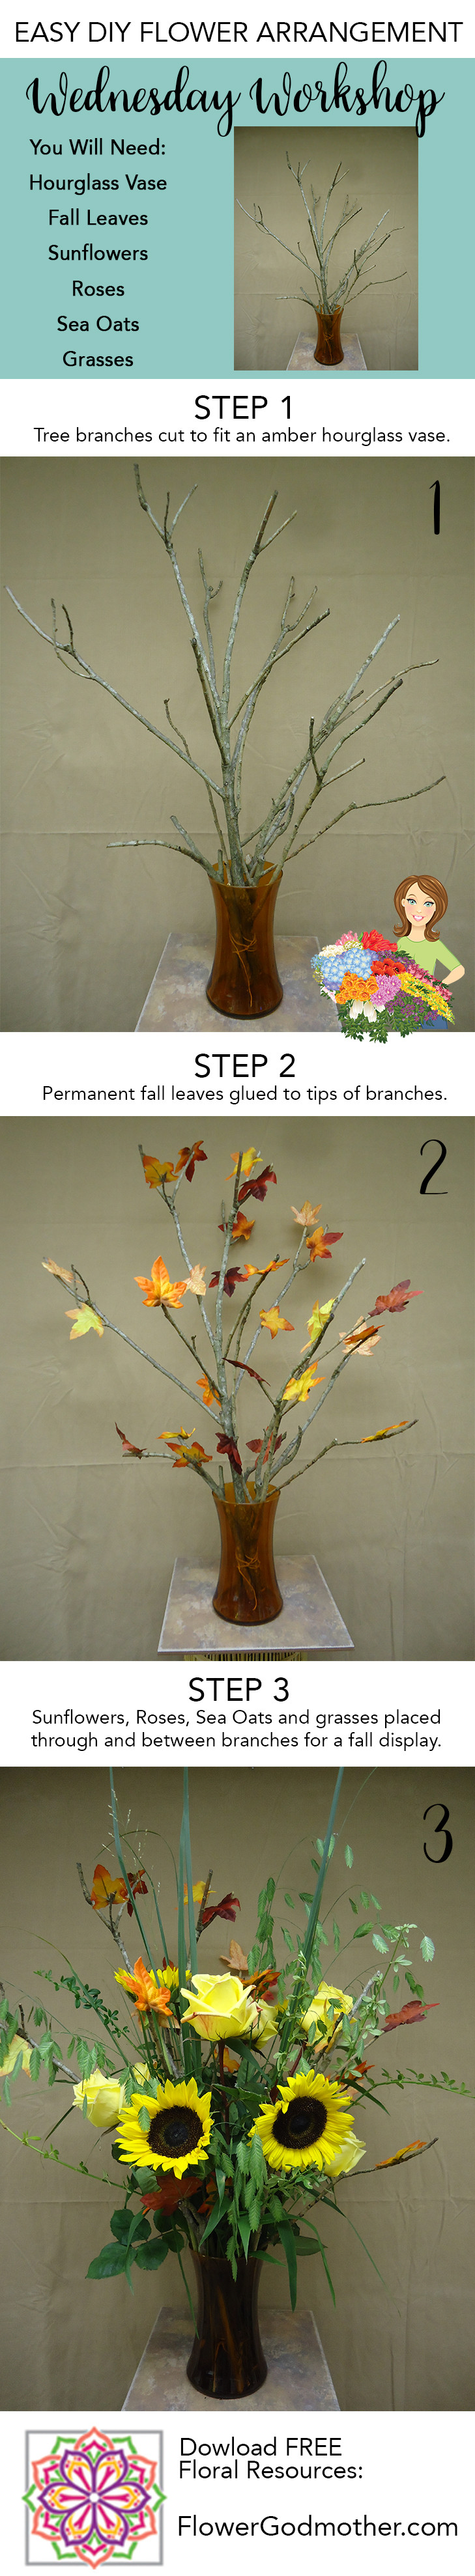 30 Elegant Natural Stone Ikebana Vases 2024 free download natural stone ikebana vases of wednesday workshop a simple exterior natural armature 1 tree with a simple exterior natural armature 1 tree branches cut to fit an amber hourglass vase 2 perma